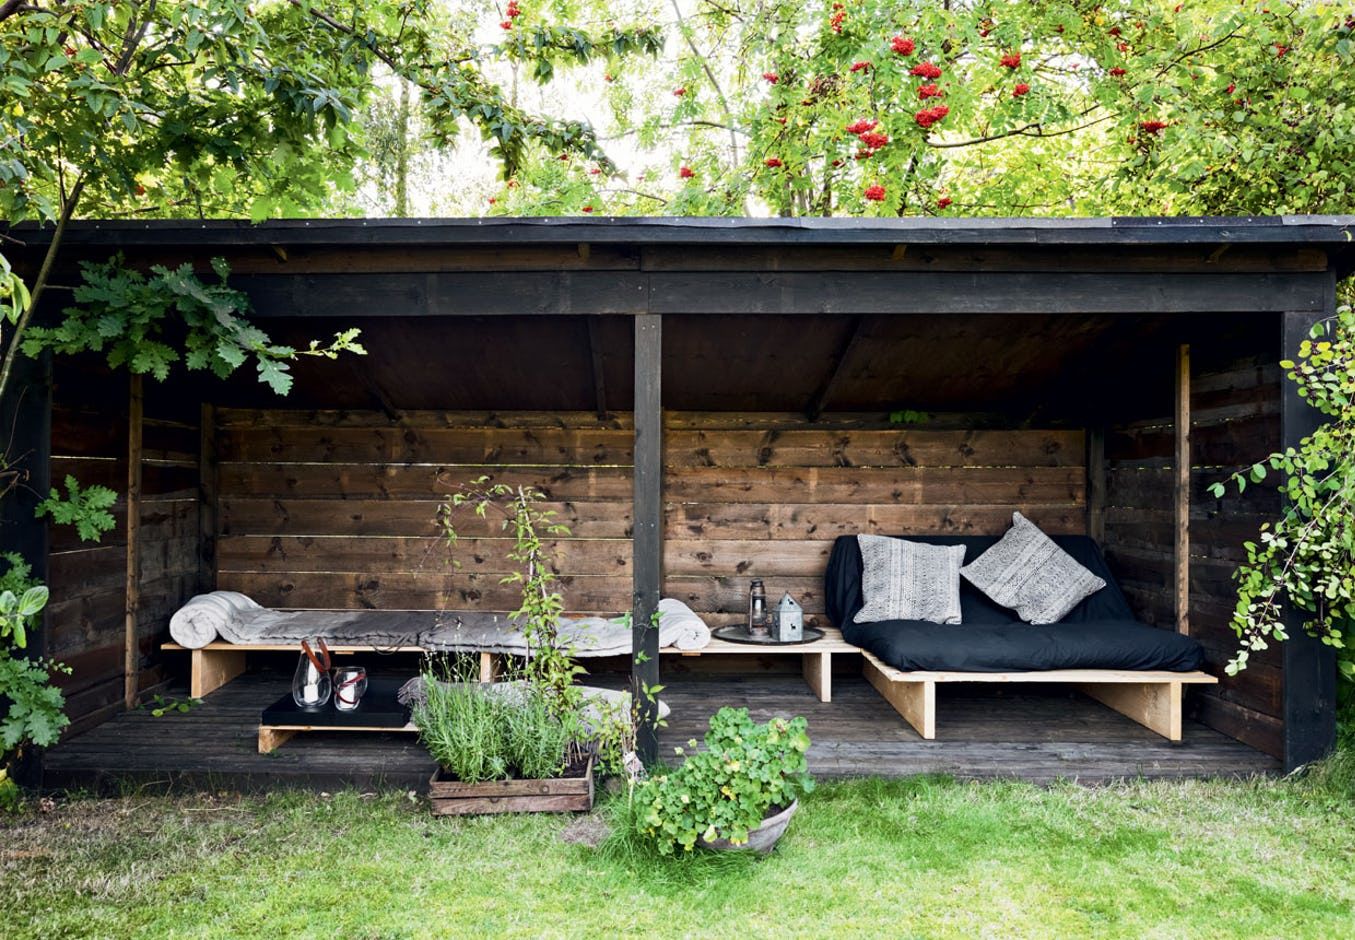 All about Garden Shelters: Essential Features and Ideas for Enjoying the Outdoors